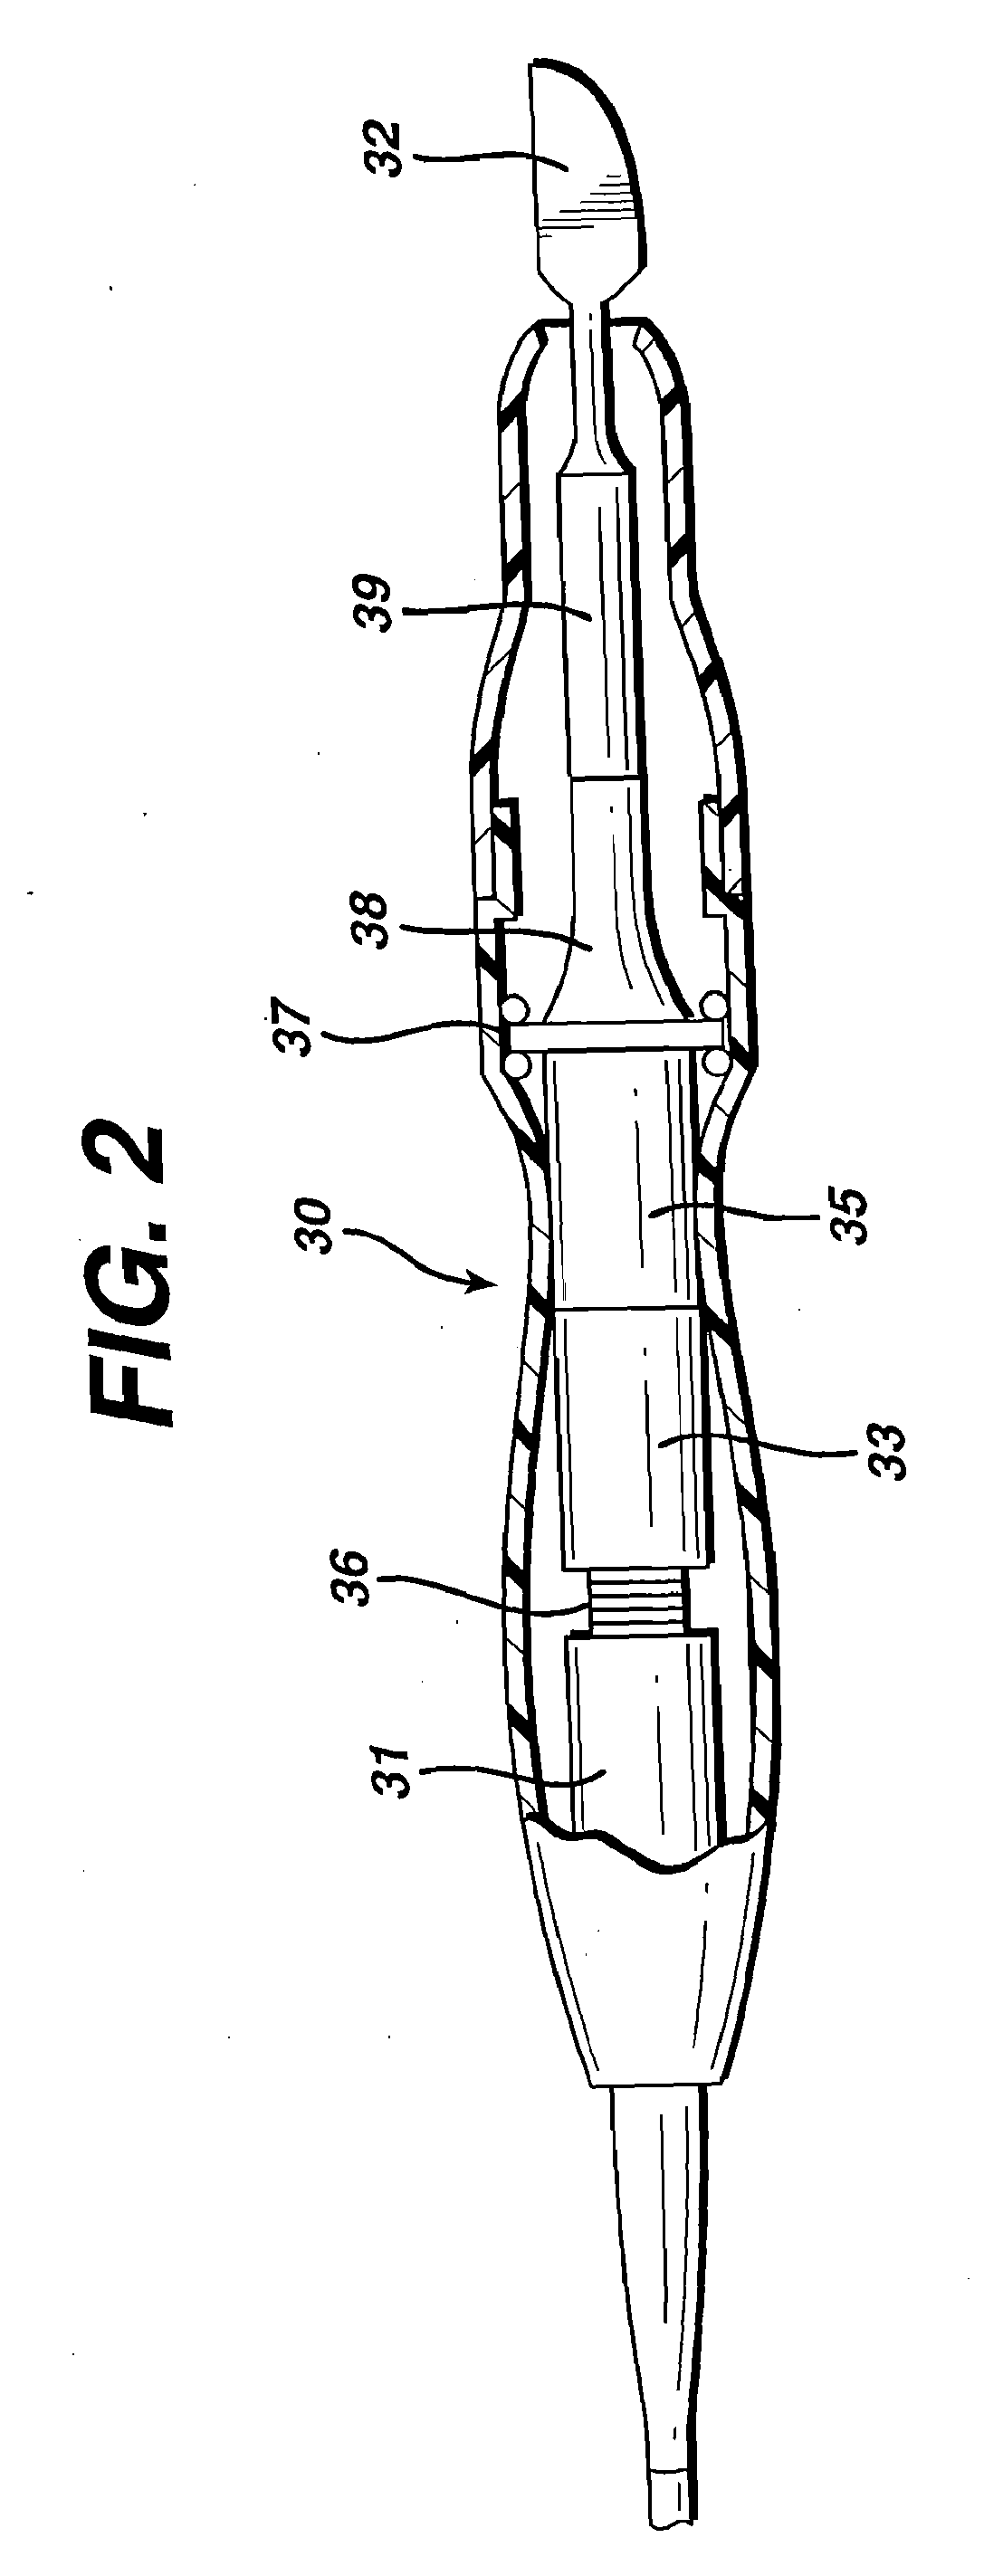 Apparatus and method for alerting generator functions in an ultrasonic surgical system